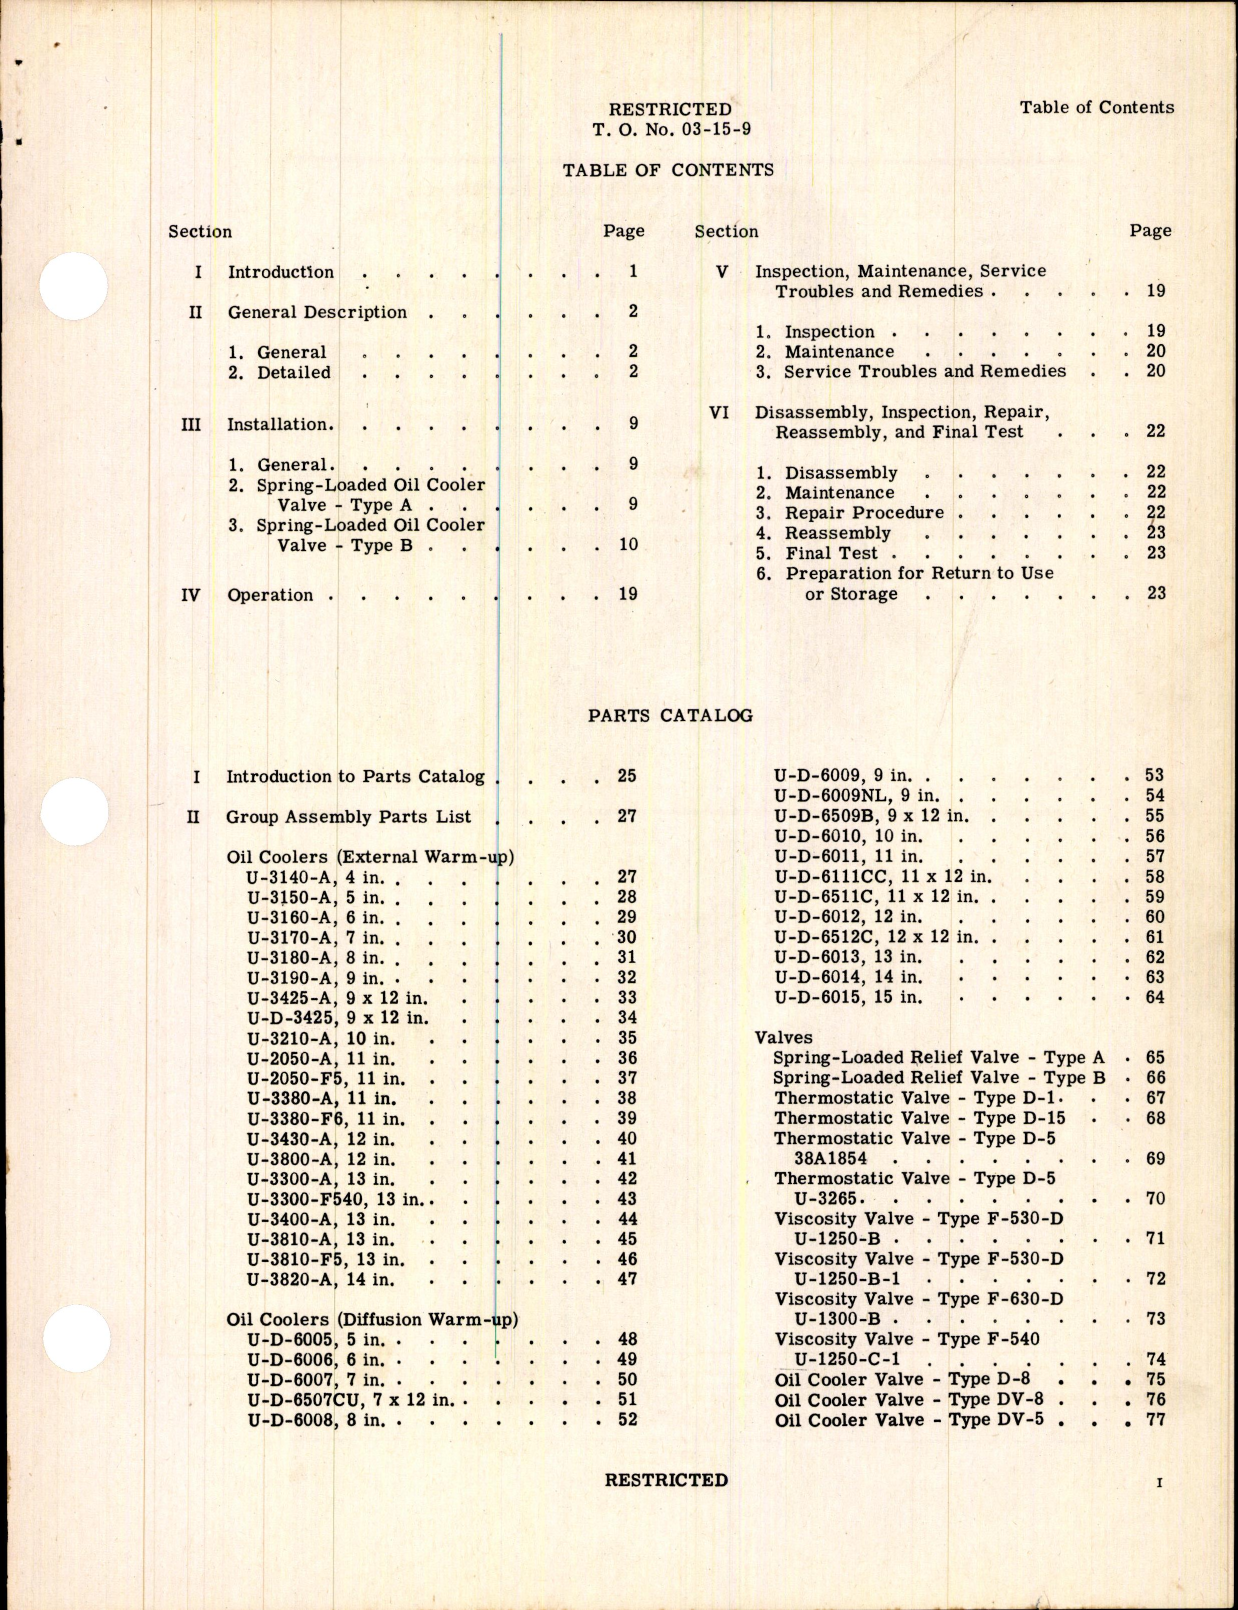 Sample page 3 from AirCorps Library document: Instructions with Parts Catalog for Oil Coolers